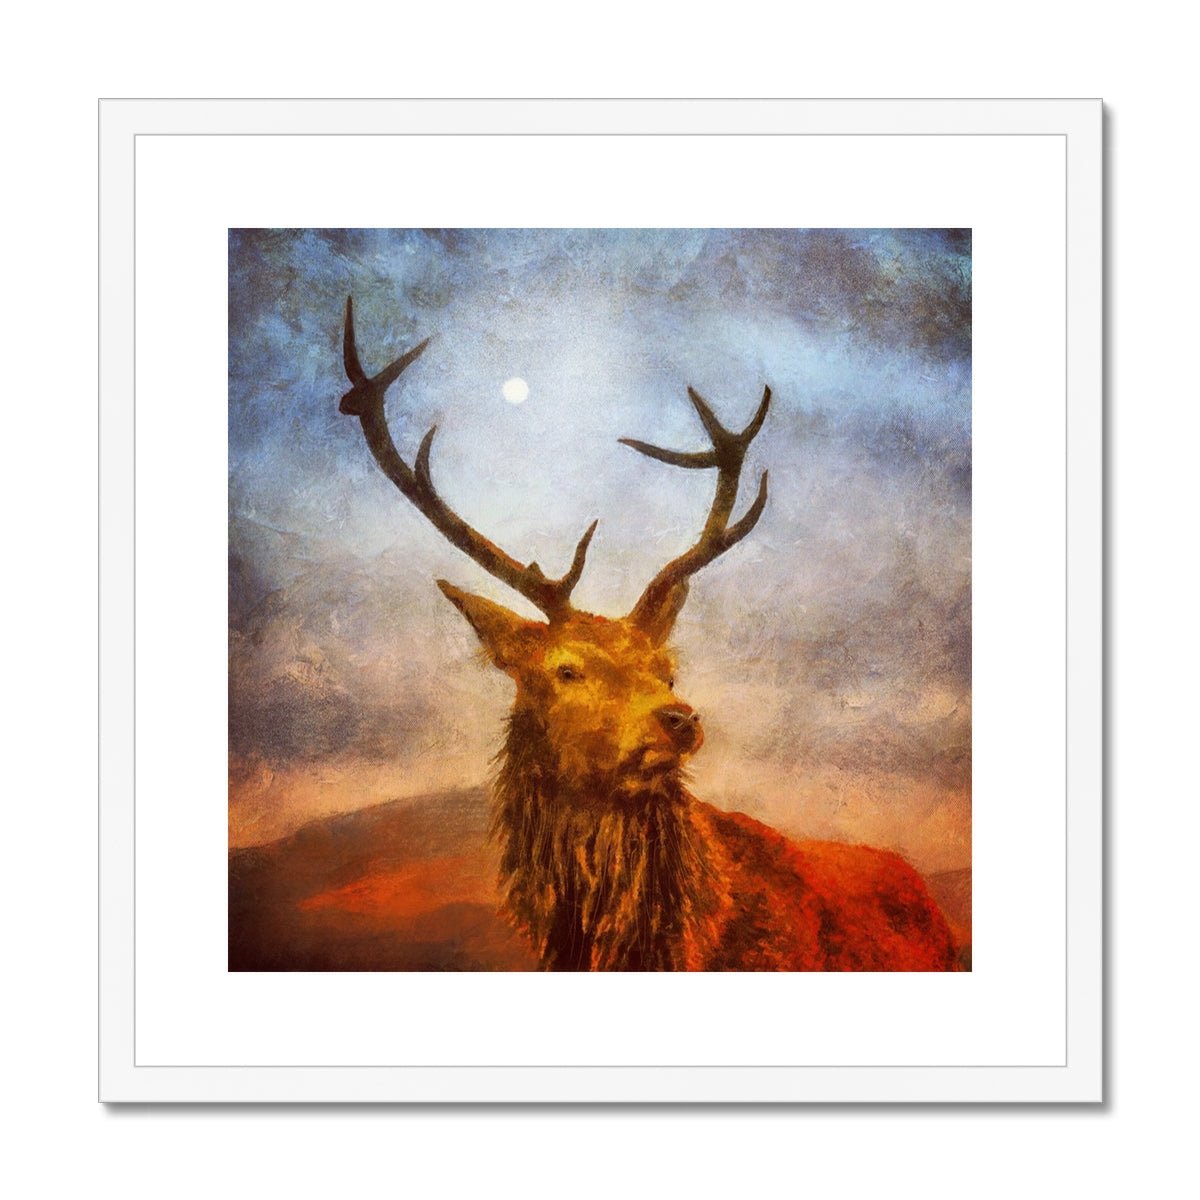 A Moonlit Highland Stag Painting | Framed & Mounted Prints From Scotland-Framed & Mounted Prints-Scottish Highlands & Lowlands Art Gallery-20"x20"-White Frame-Paintings, Prints, Homeware, Art Gifts From Scotland By Scottish Artist Kevin Hunter